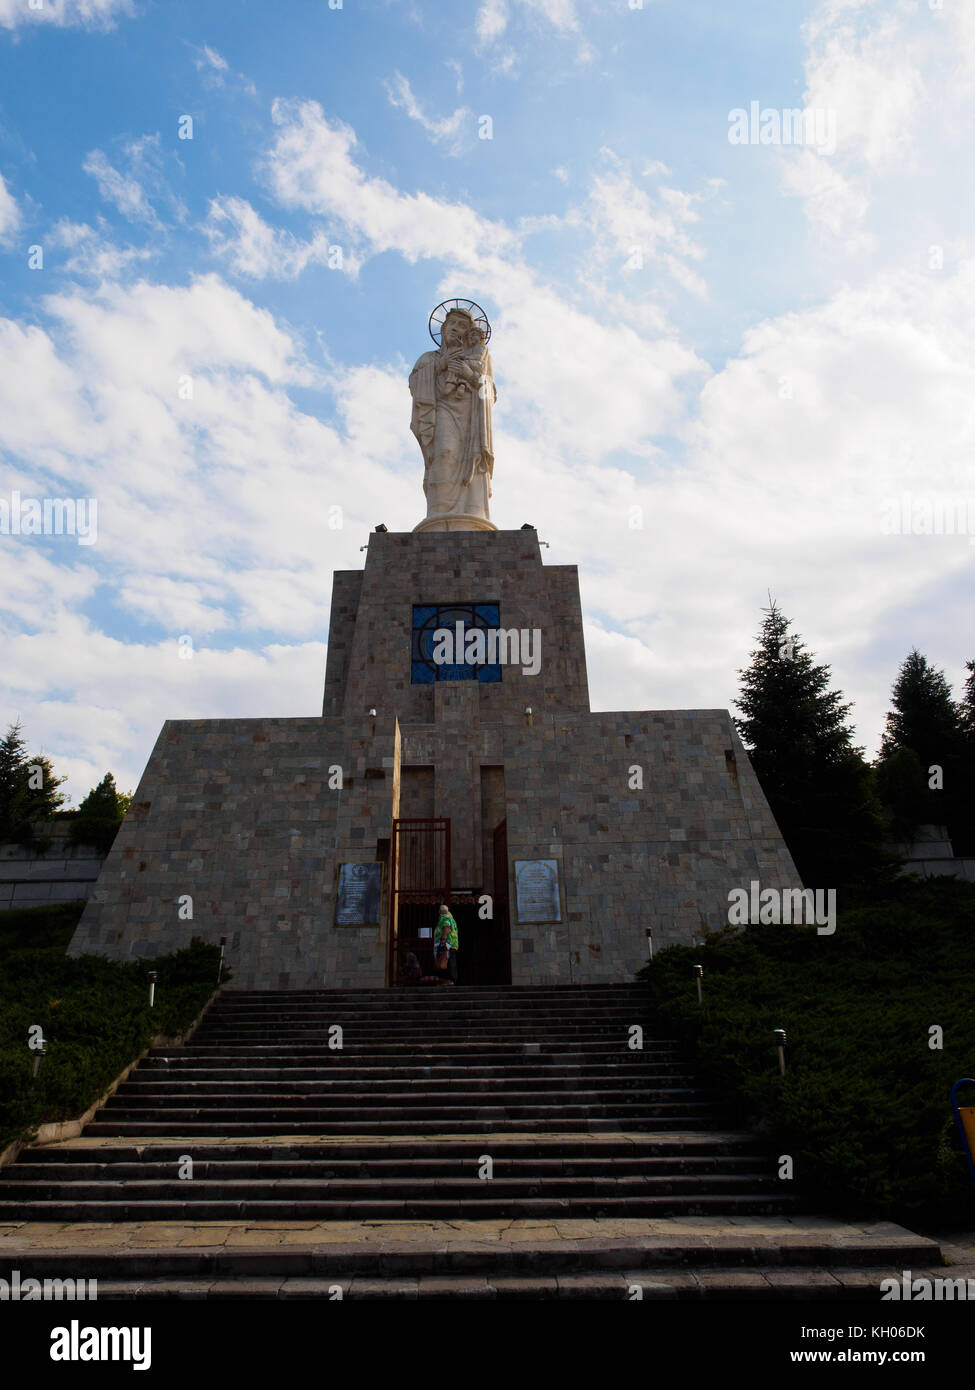 The world tallest statue of the Virgin Mary with the Infant Jesus in the tall of Haskovo, Bulgaria Stock Photo